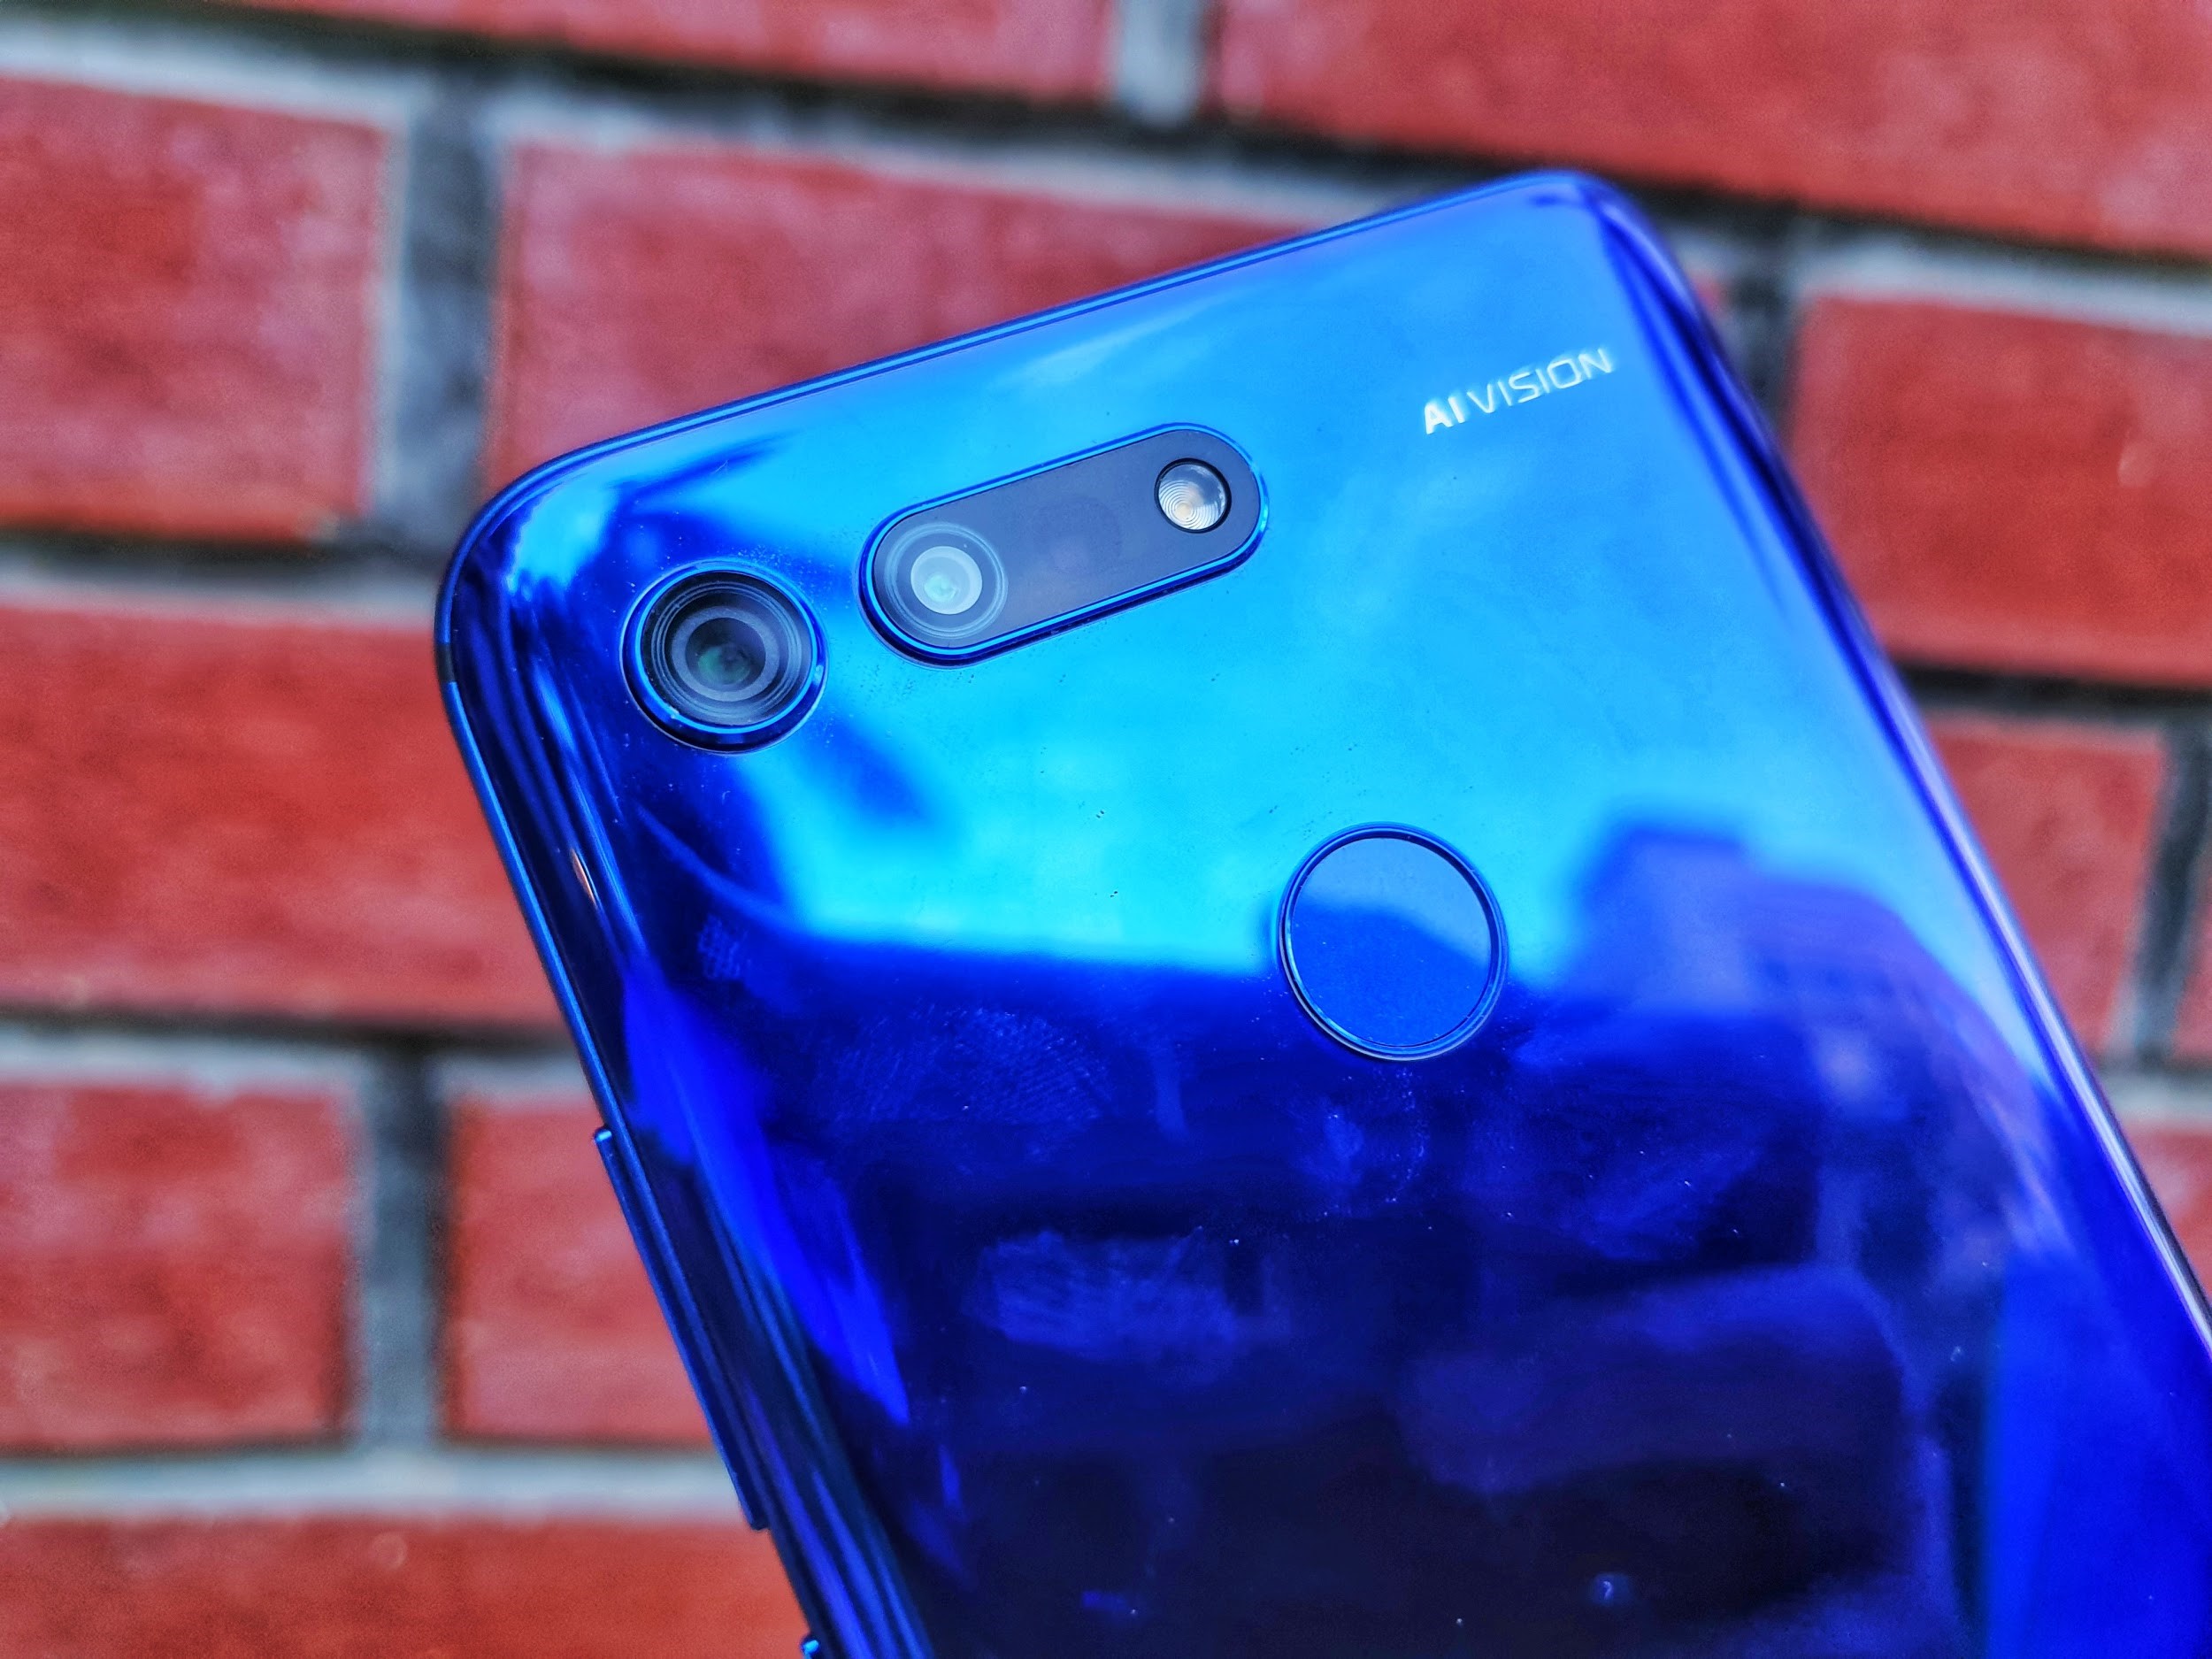 HONOR’s View20: A smartphone with a powerful camera that is built for travel